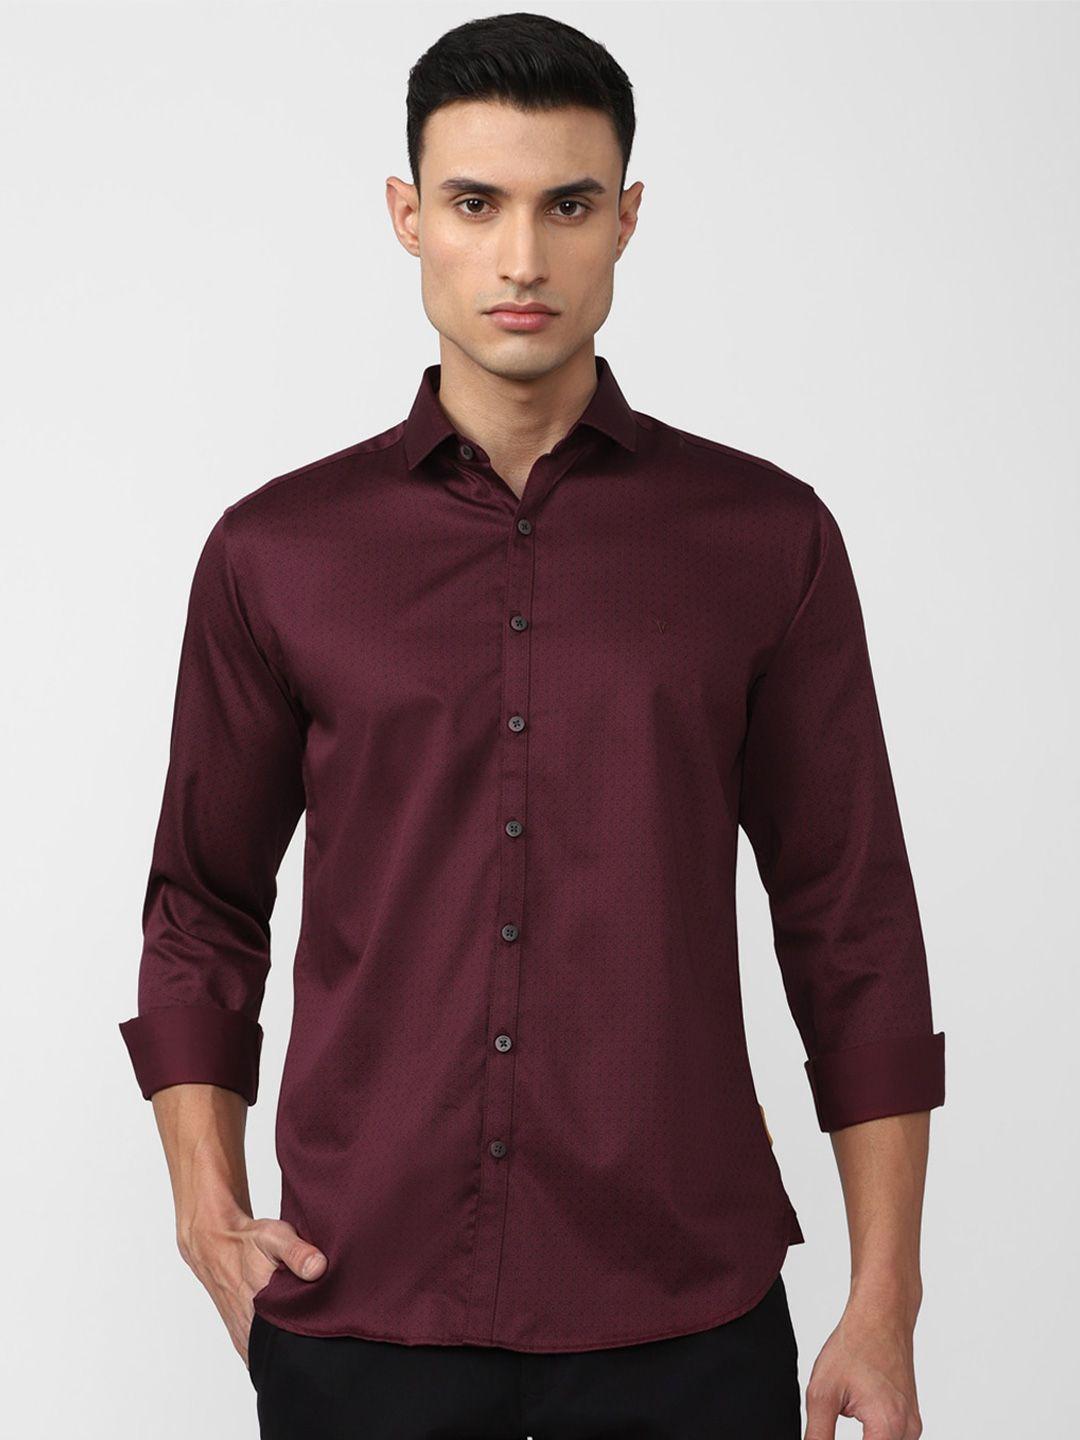 v dot slim fit spread collar opaque casual cotton shirt